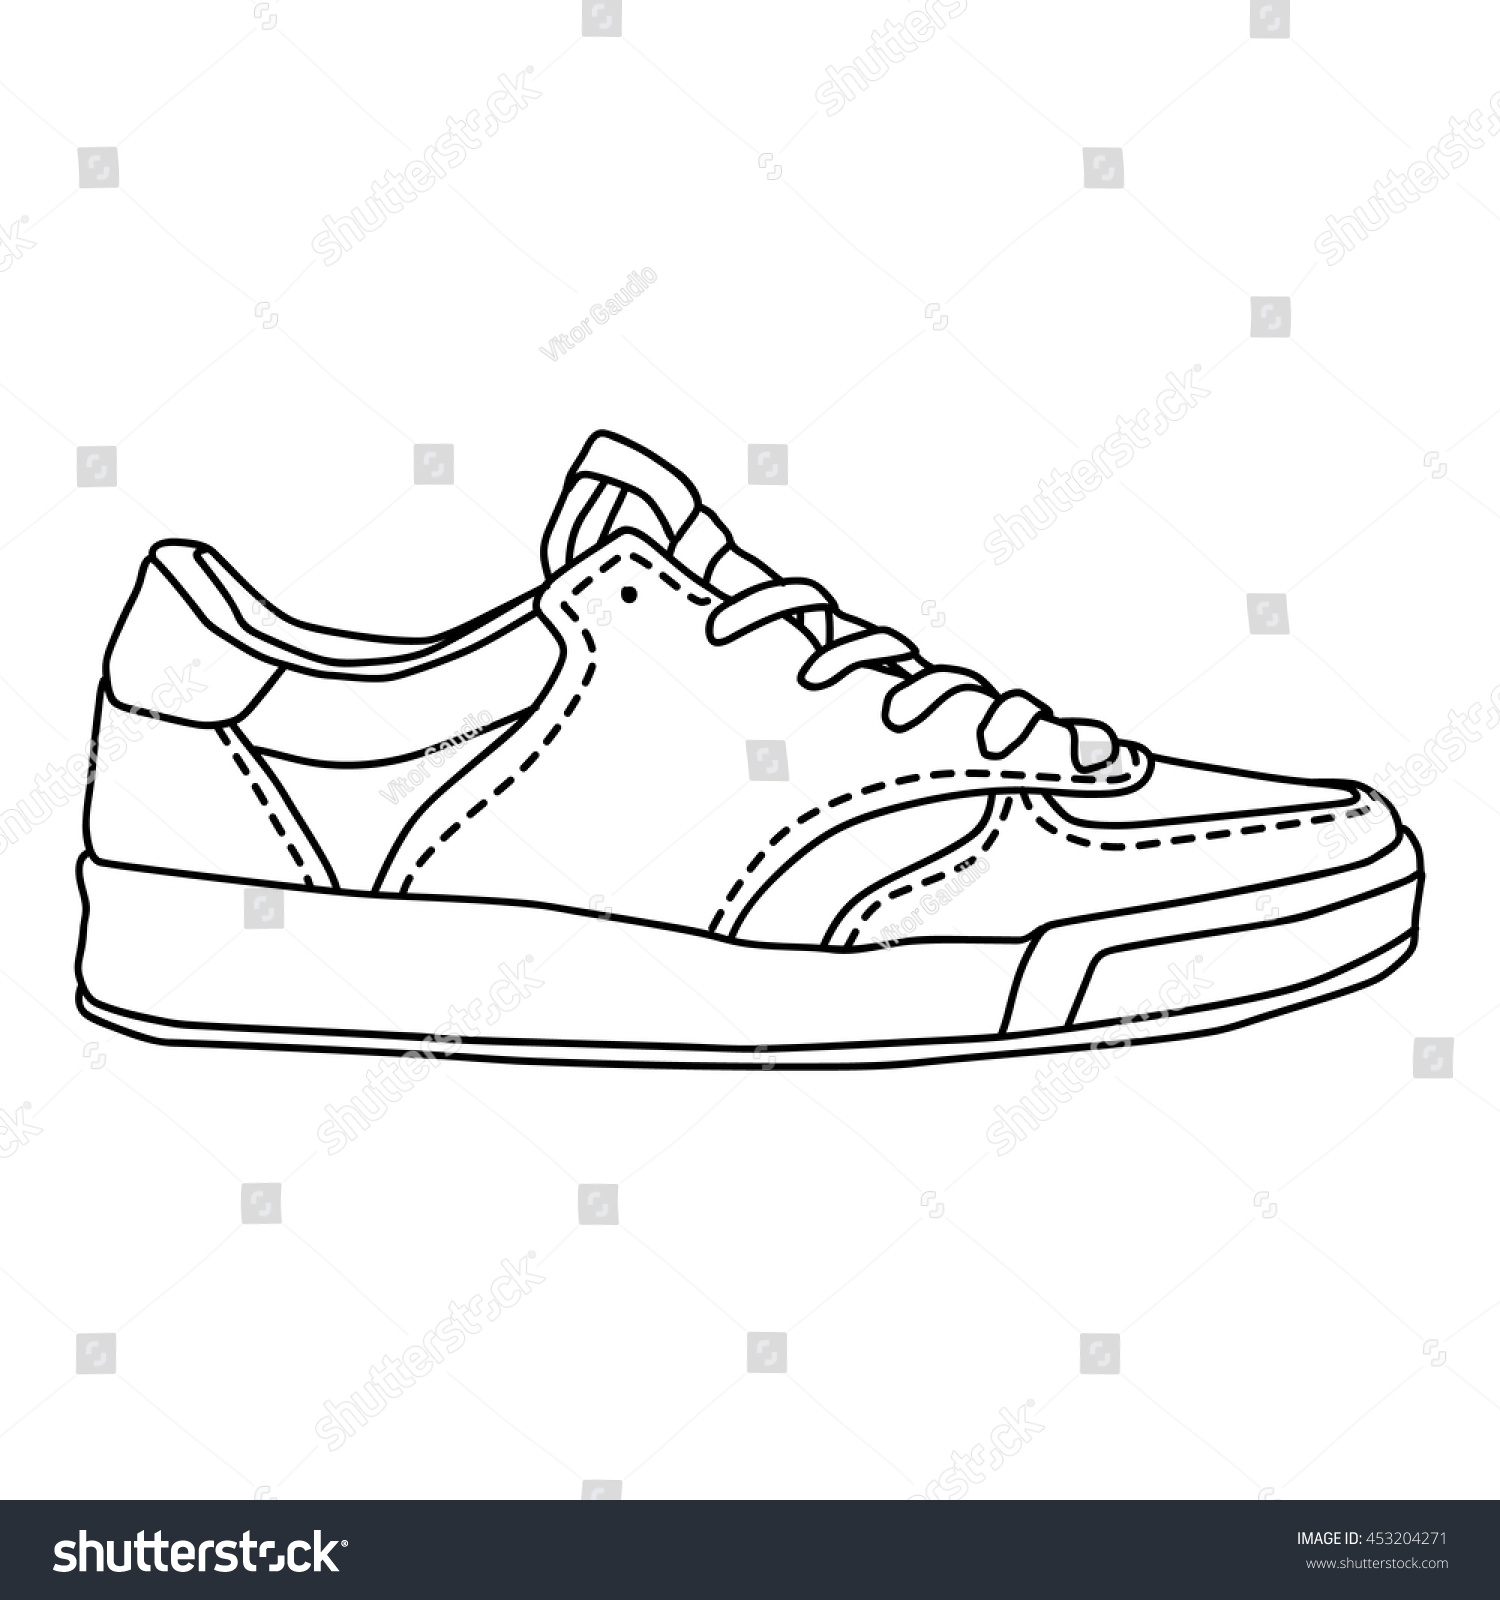 Shoes Icon Sneaker Sketch Handmade Shoes Stock Vector (Royalty Free ...